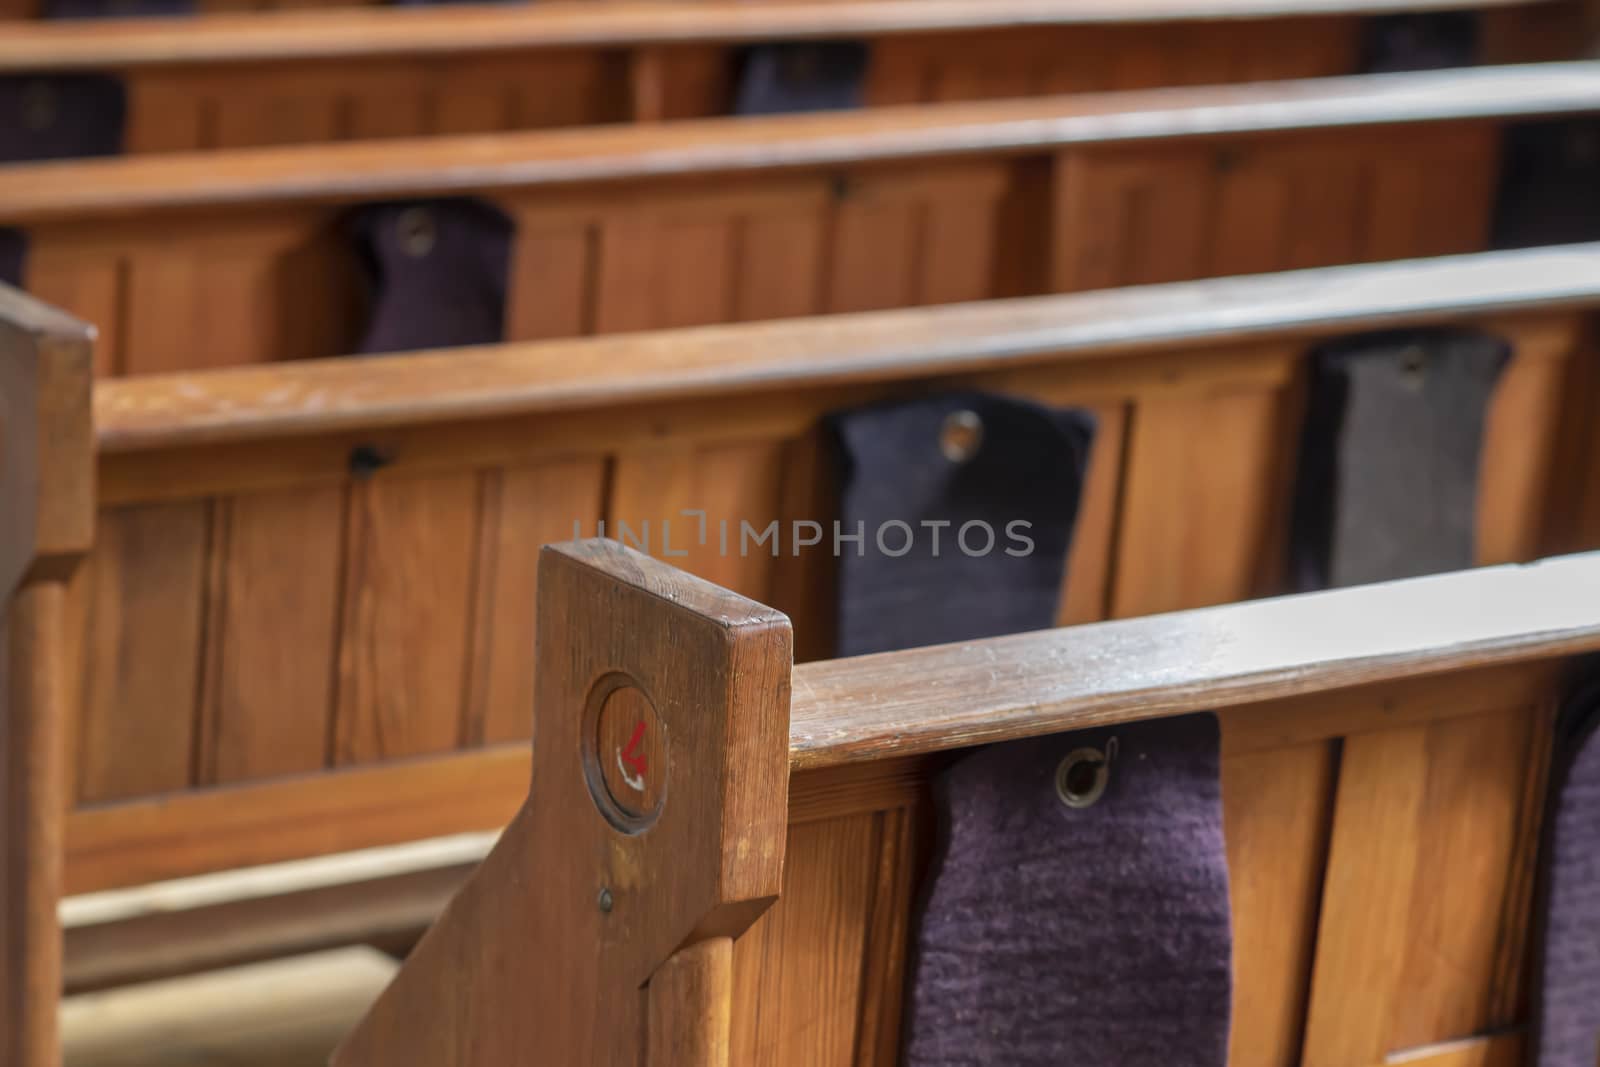 Pews in an old church in the Netherlands
